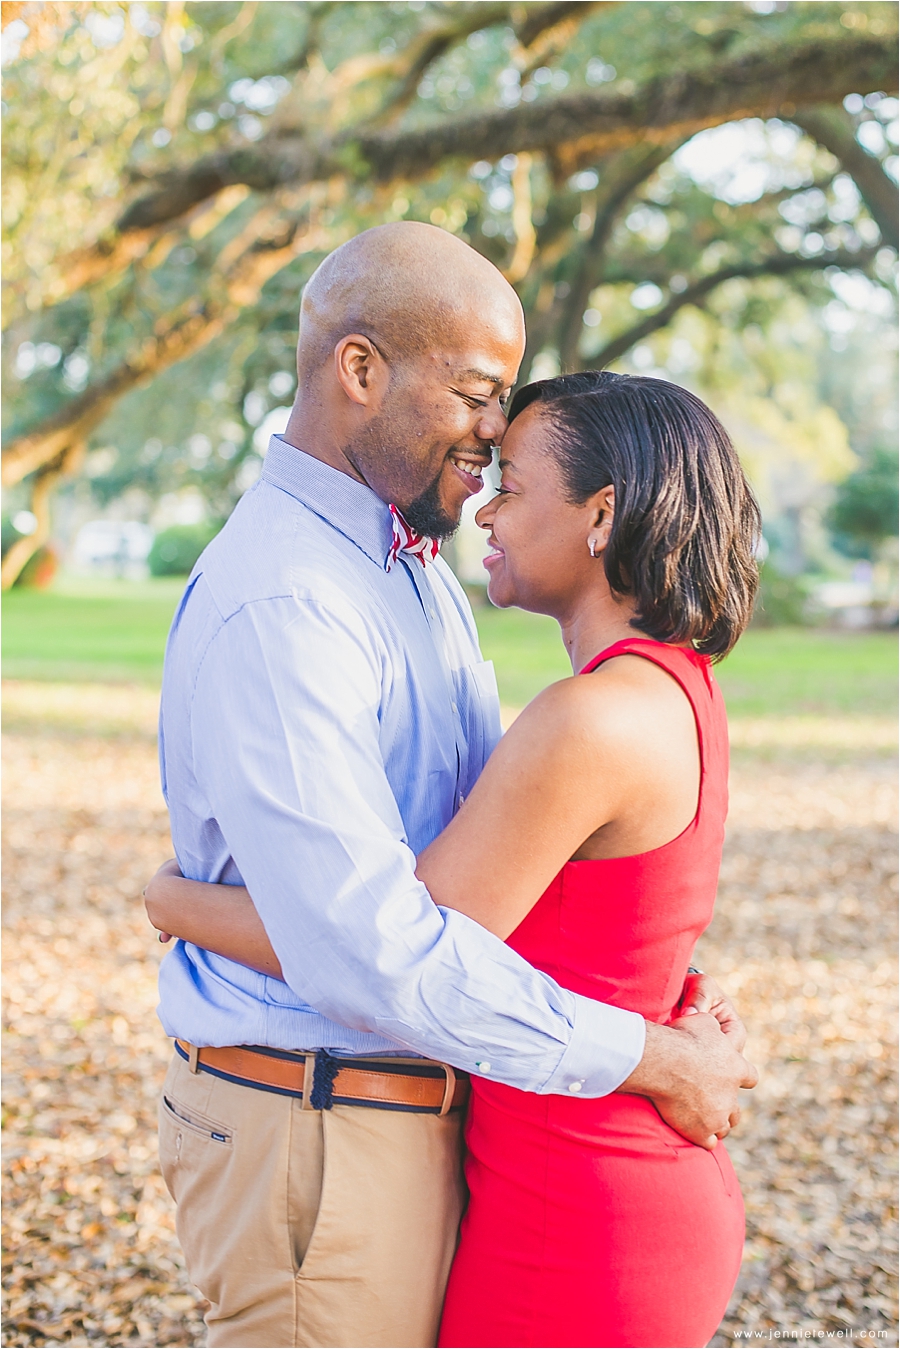 Dating in mobile alabama